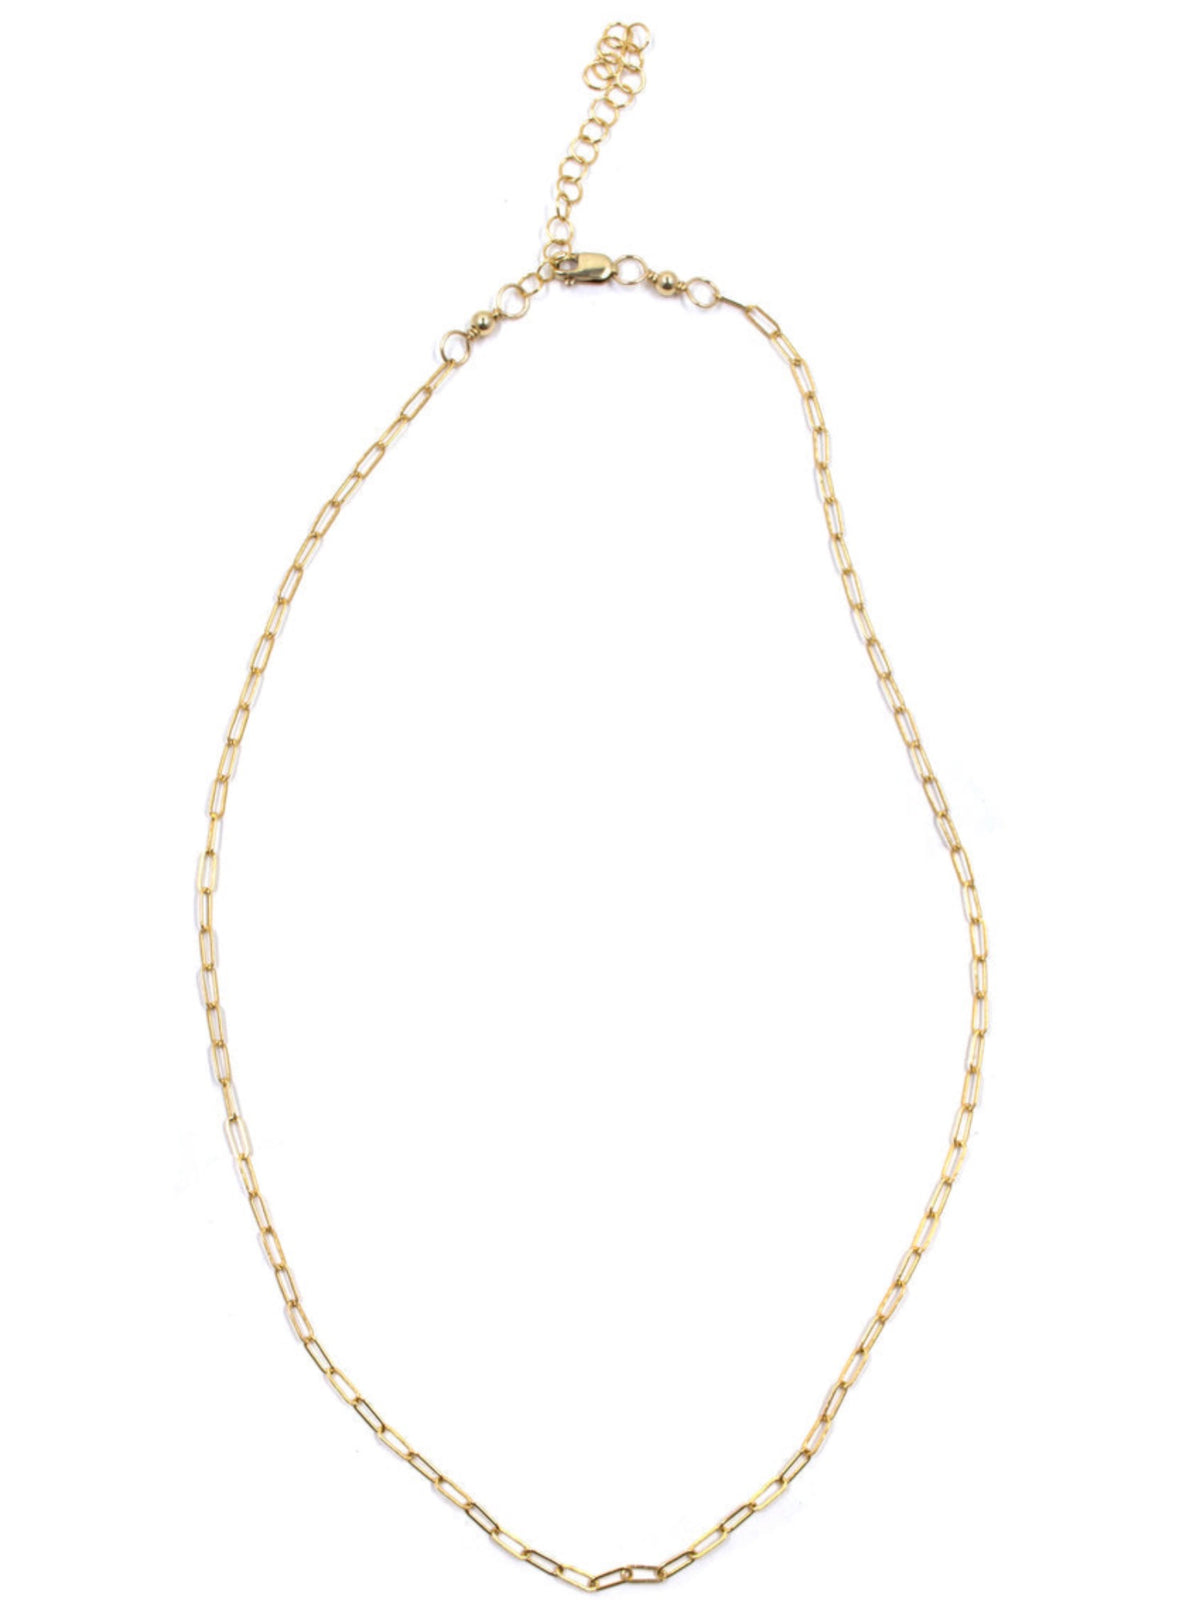 Bent by Courtney - Layering Chain Necklace - prodottihaccp